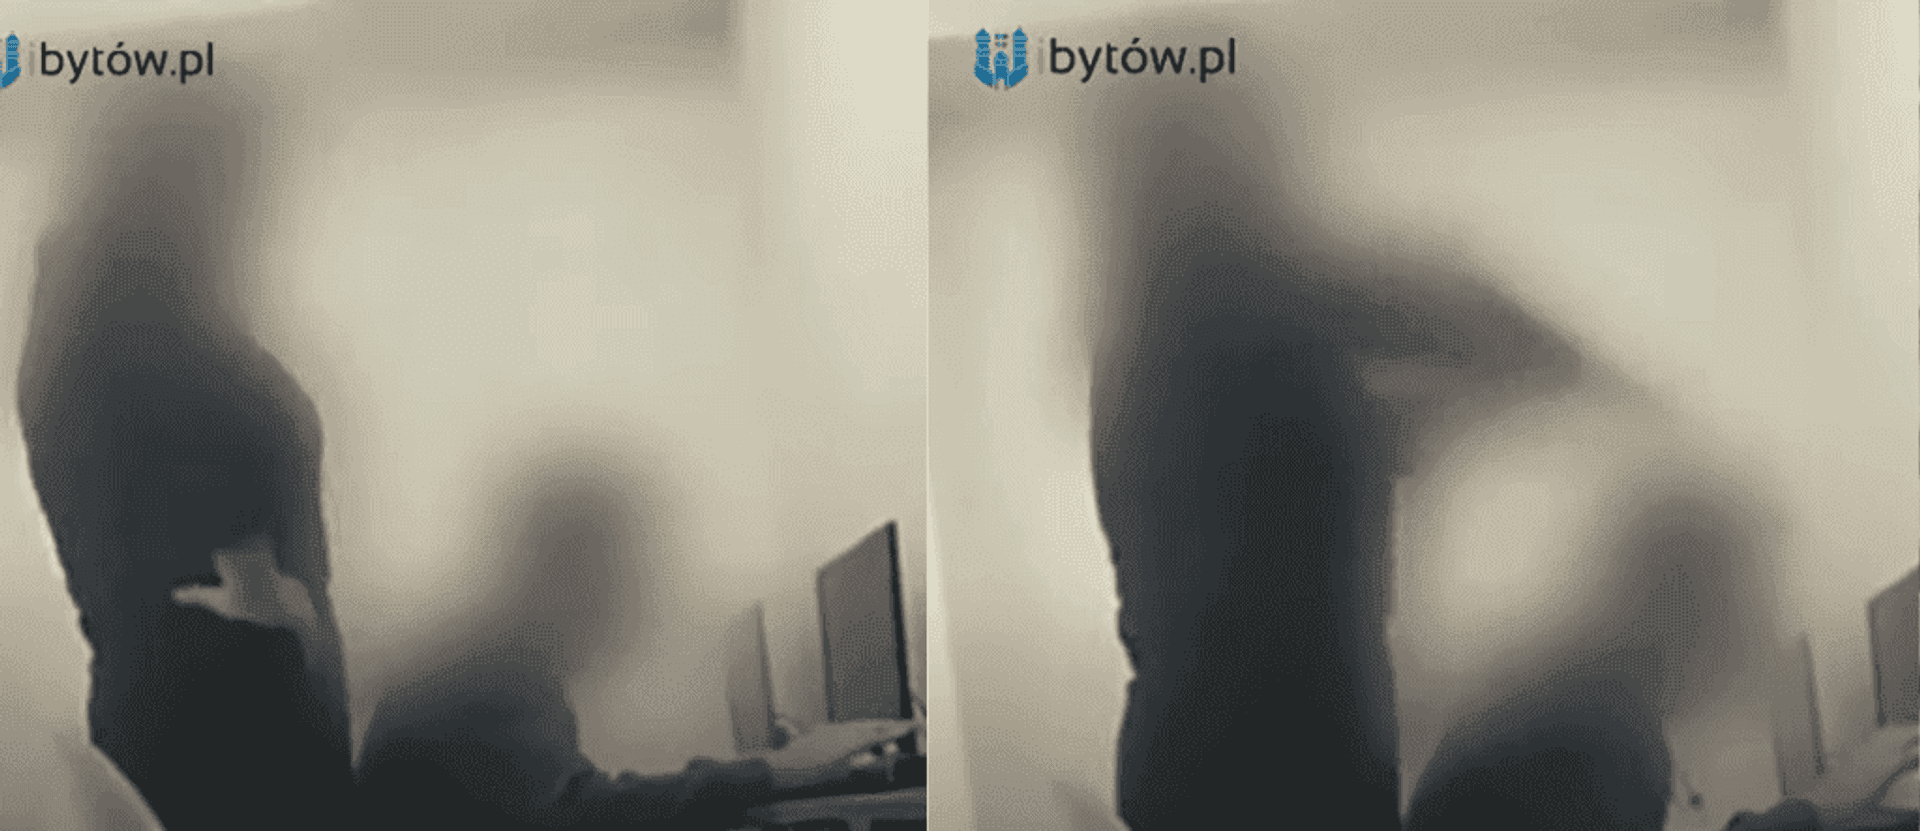 bytow